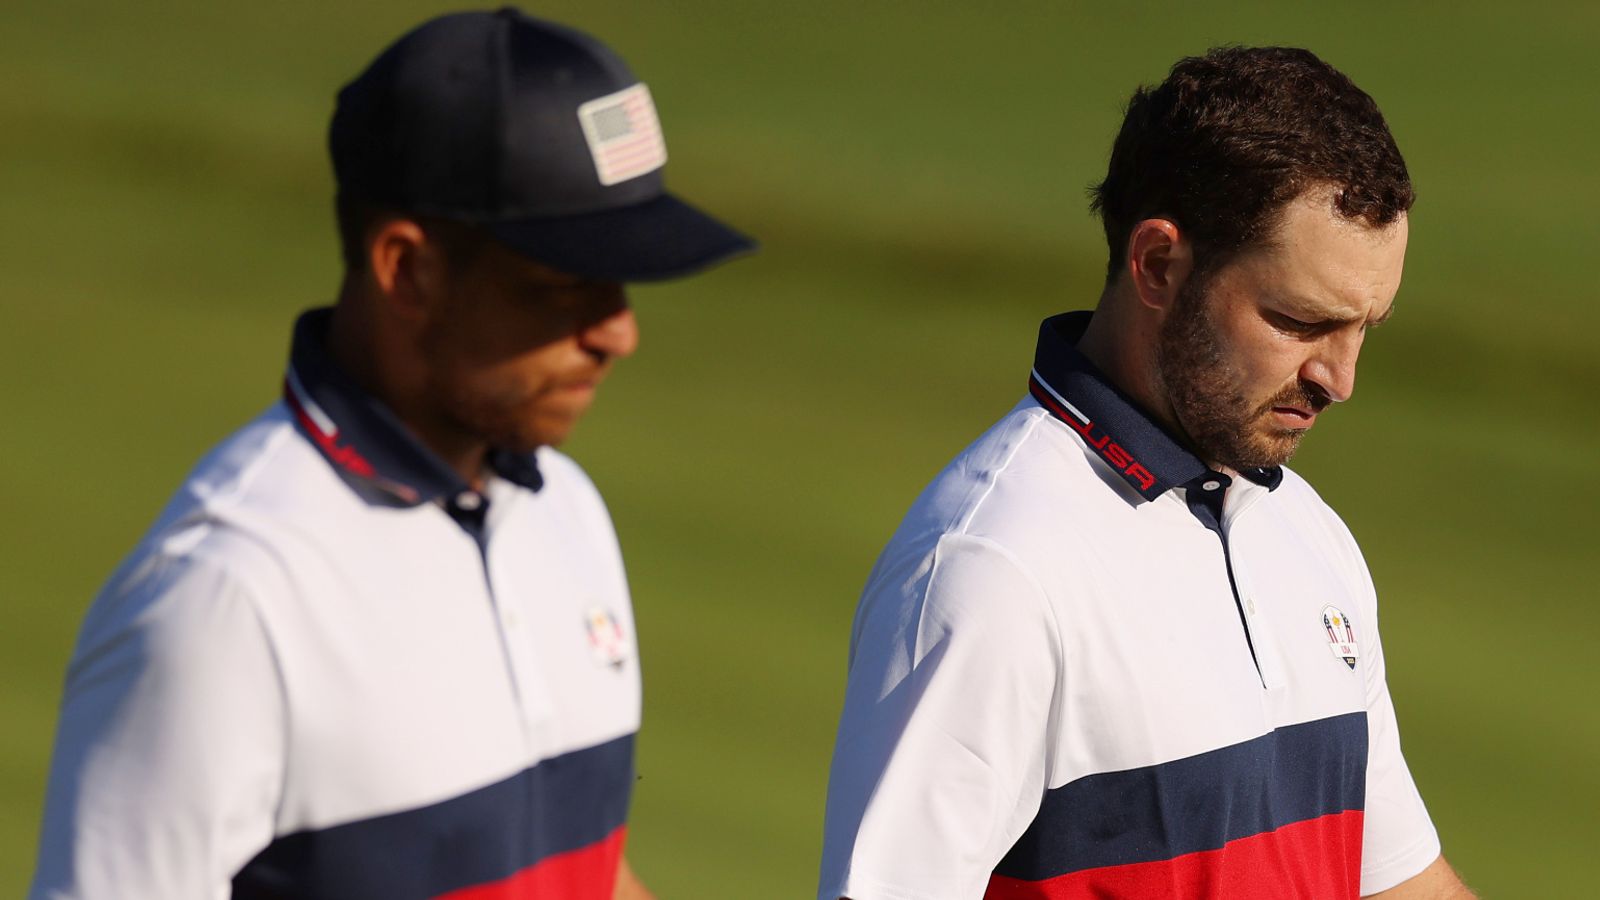 Ryder Cup: Team USA fractured as Patrick Cantlay calls for players to be paid for featuring in Rome